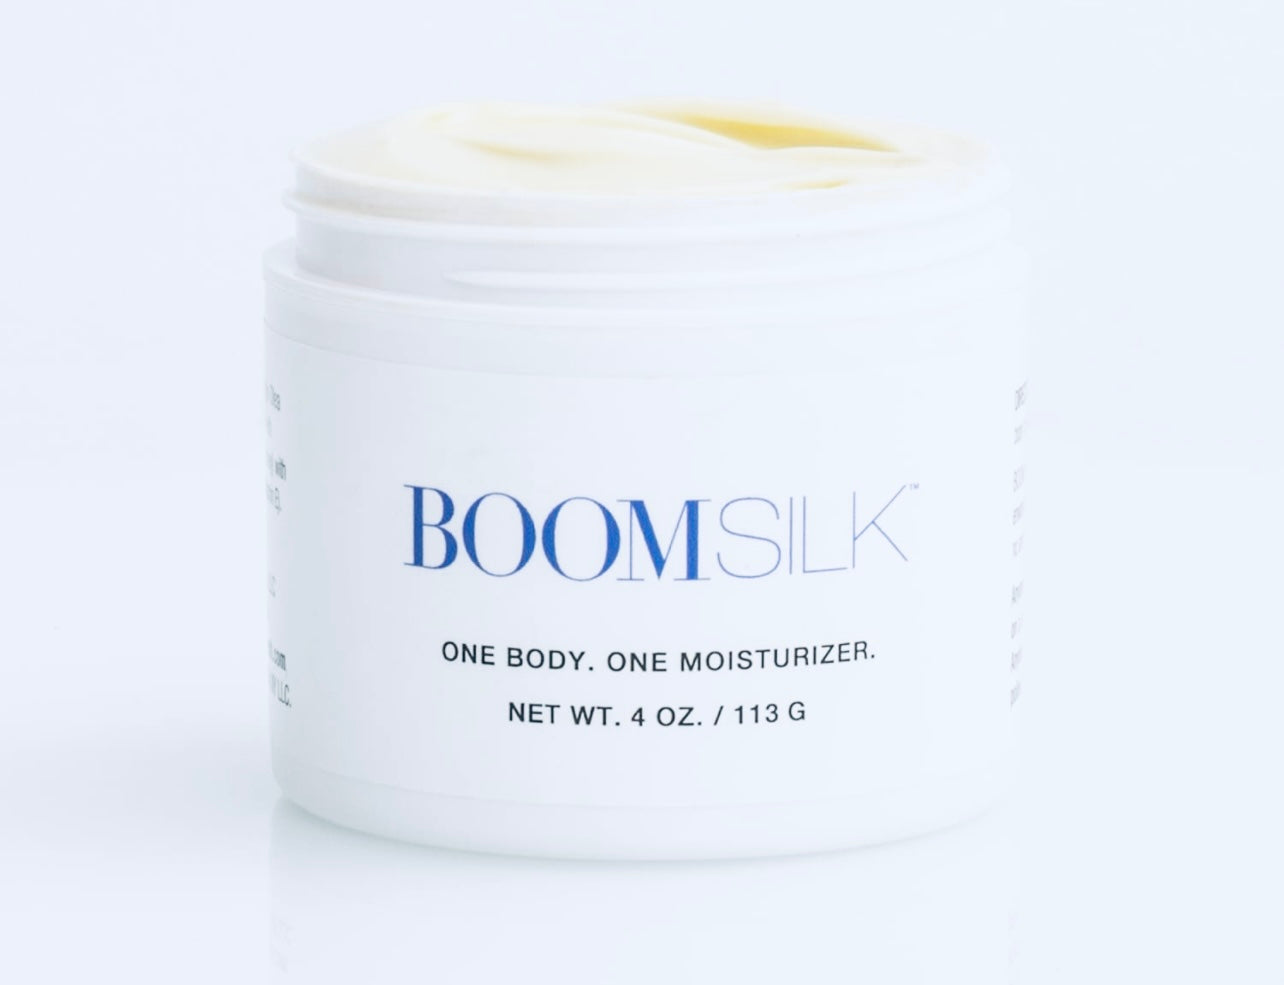 BOOM! by Cindy Joseph Boomsilk - Rejuvenating Face & Body Moisturizer For Aging Skin - Organic Body Lotion for Women to Soften and Protect Your Skin - 2 Ounce